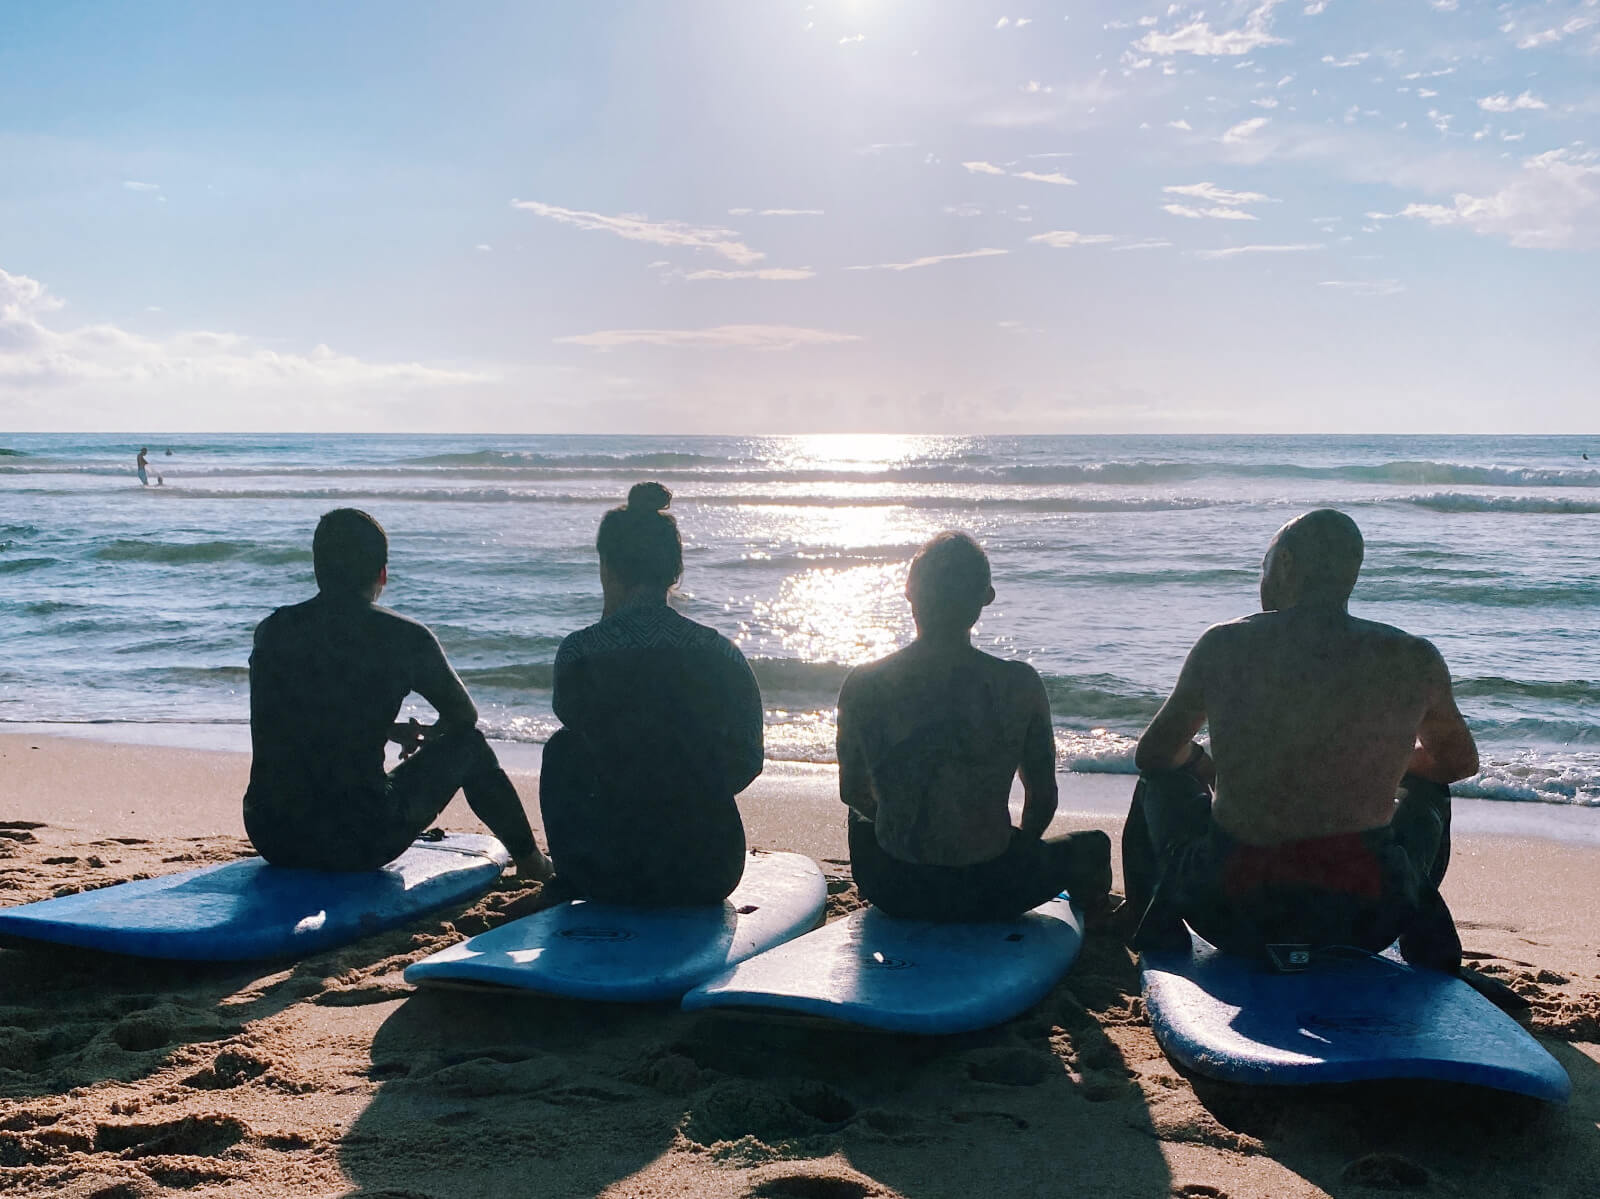 4 people sitting on a surfboard watching the ocean